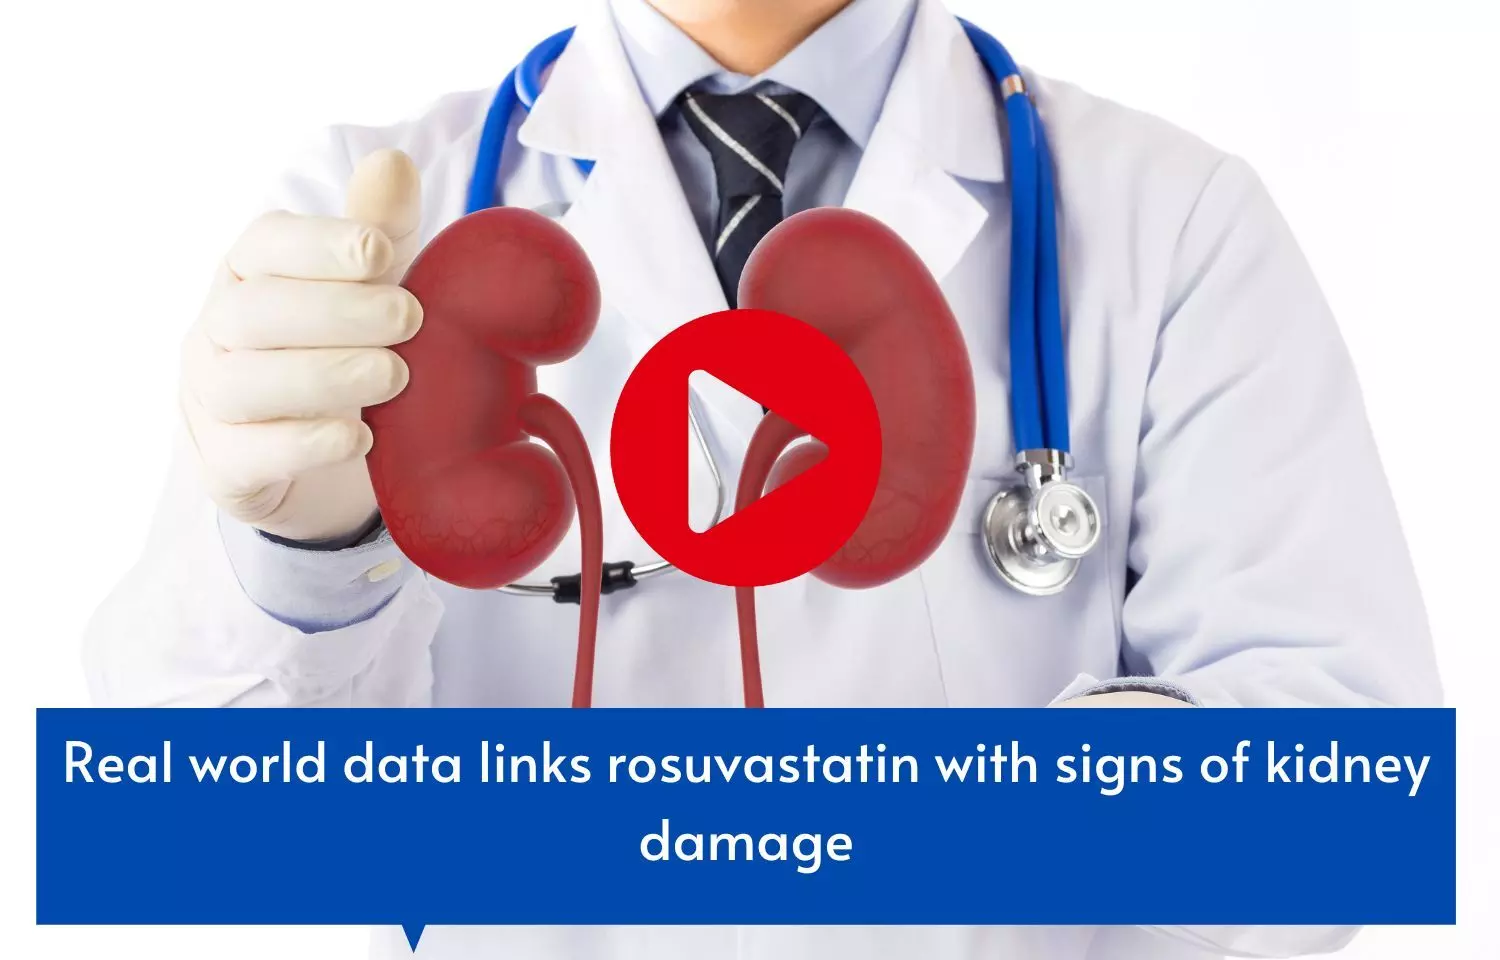 Real world data links rosuvastatin with signs of kidney damage